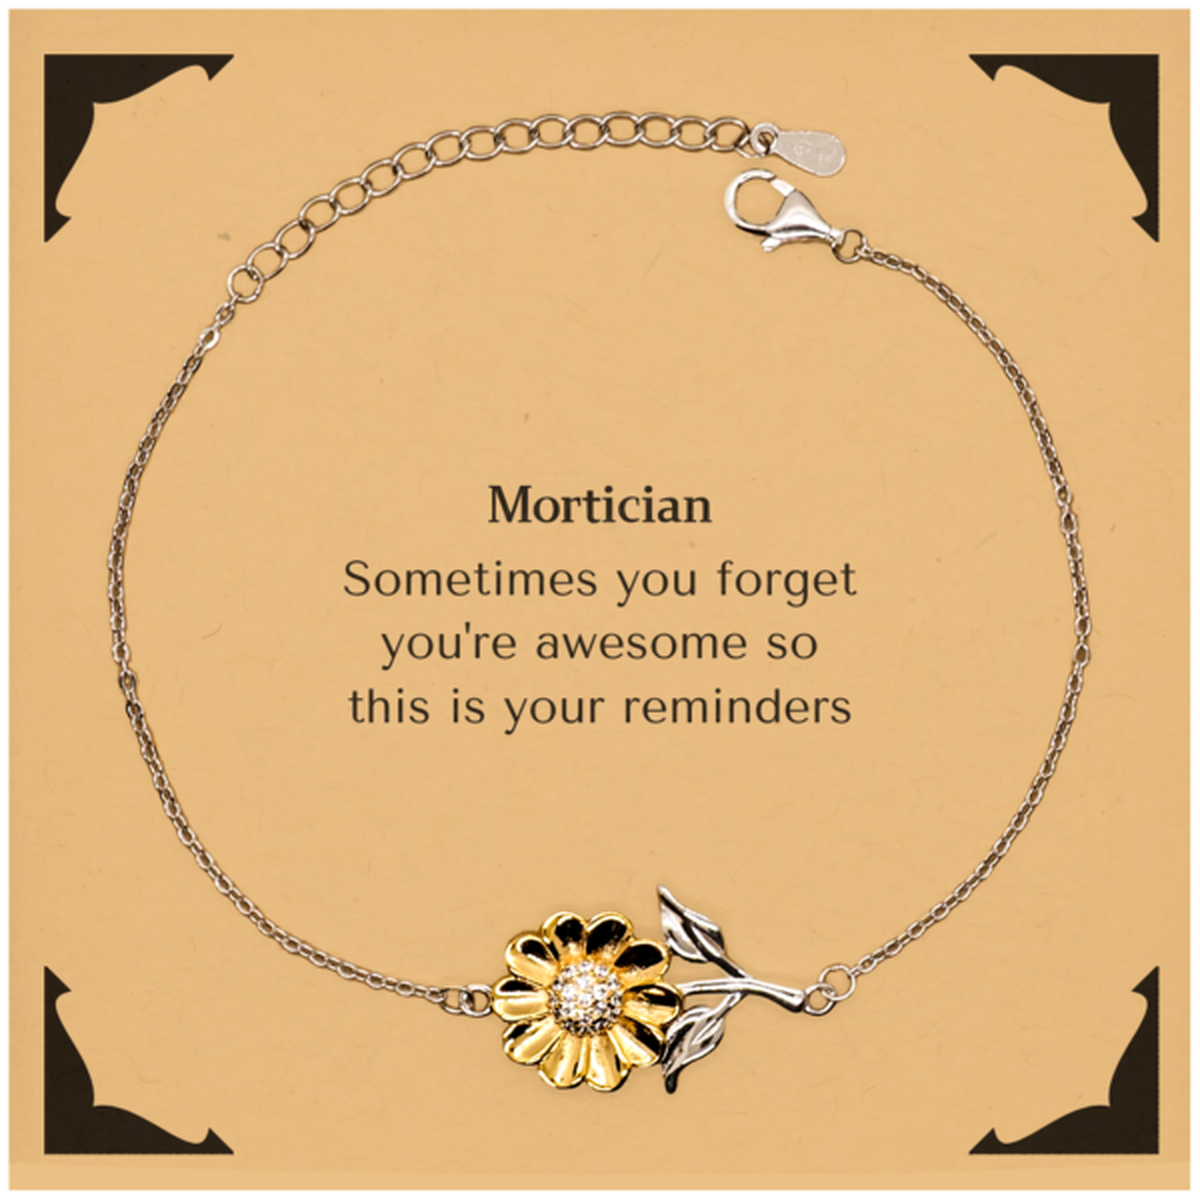 Sentimental Mortician Sunflower Bracelet, Mortician Sometimes you forget you're awesome so this is your reminders, Graduation Christmas Birthday Gifts for Mortician, Men, Women, Coworkers